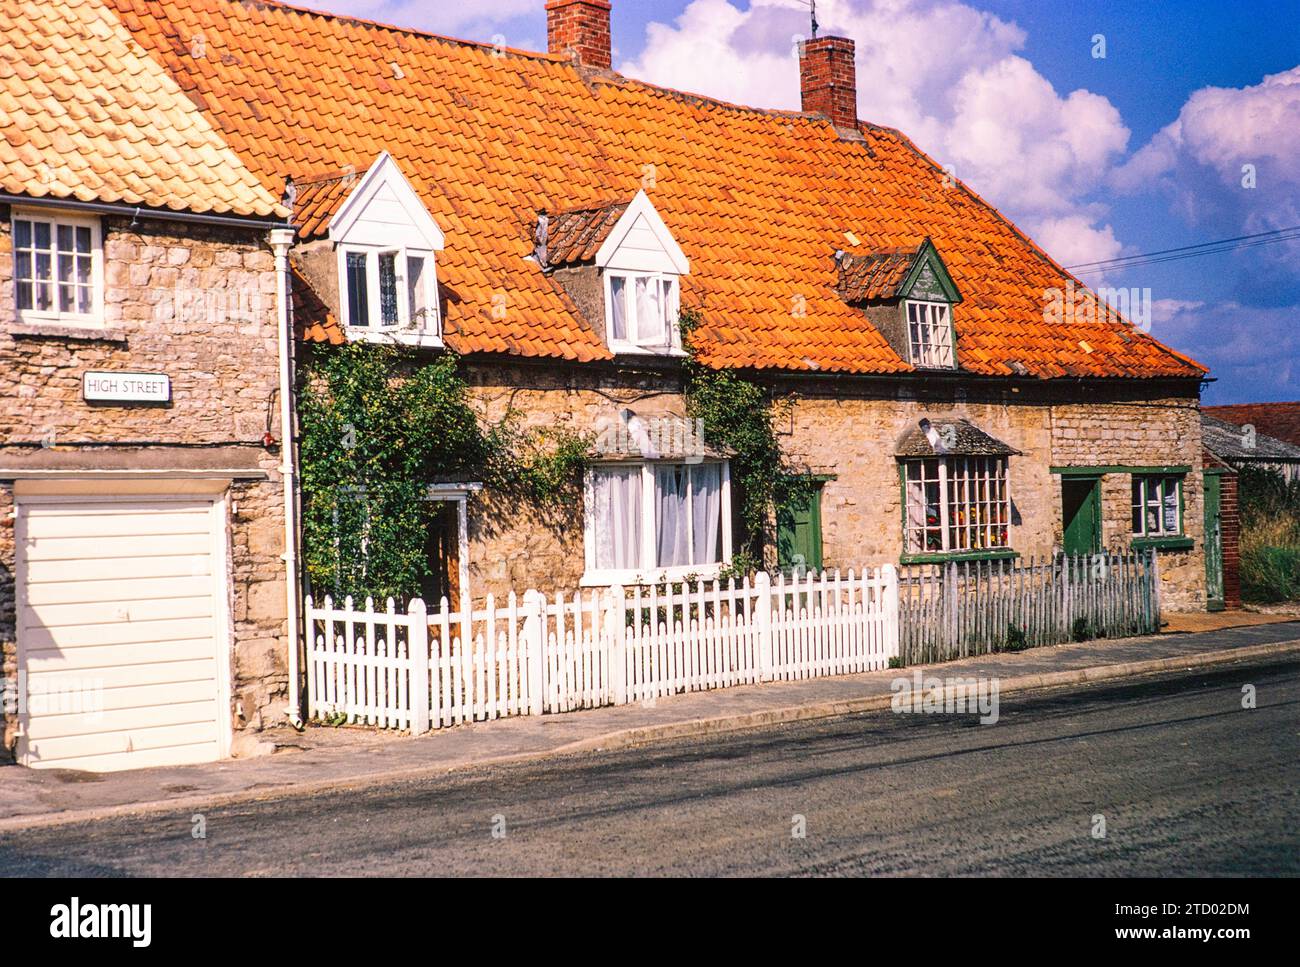 Village houses in High Street, Swinstead, Lincolnshire, England, UK 31 August 1970 Stock Photo